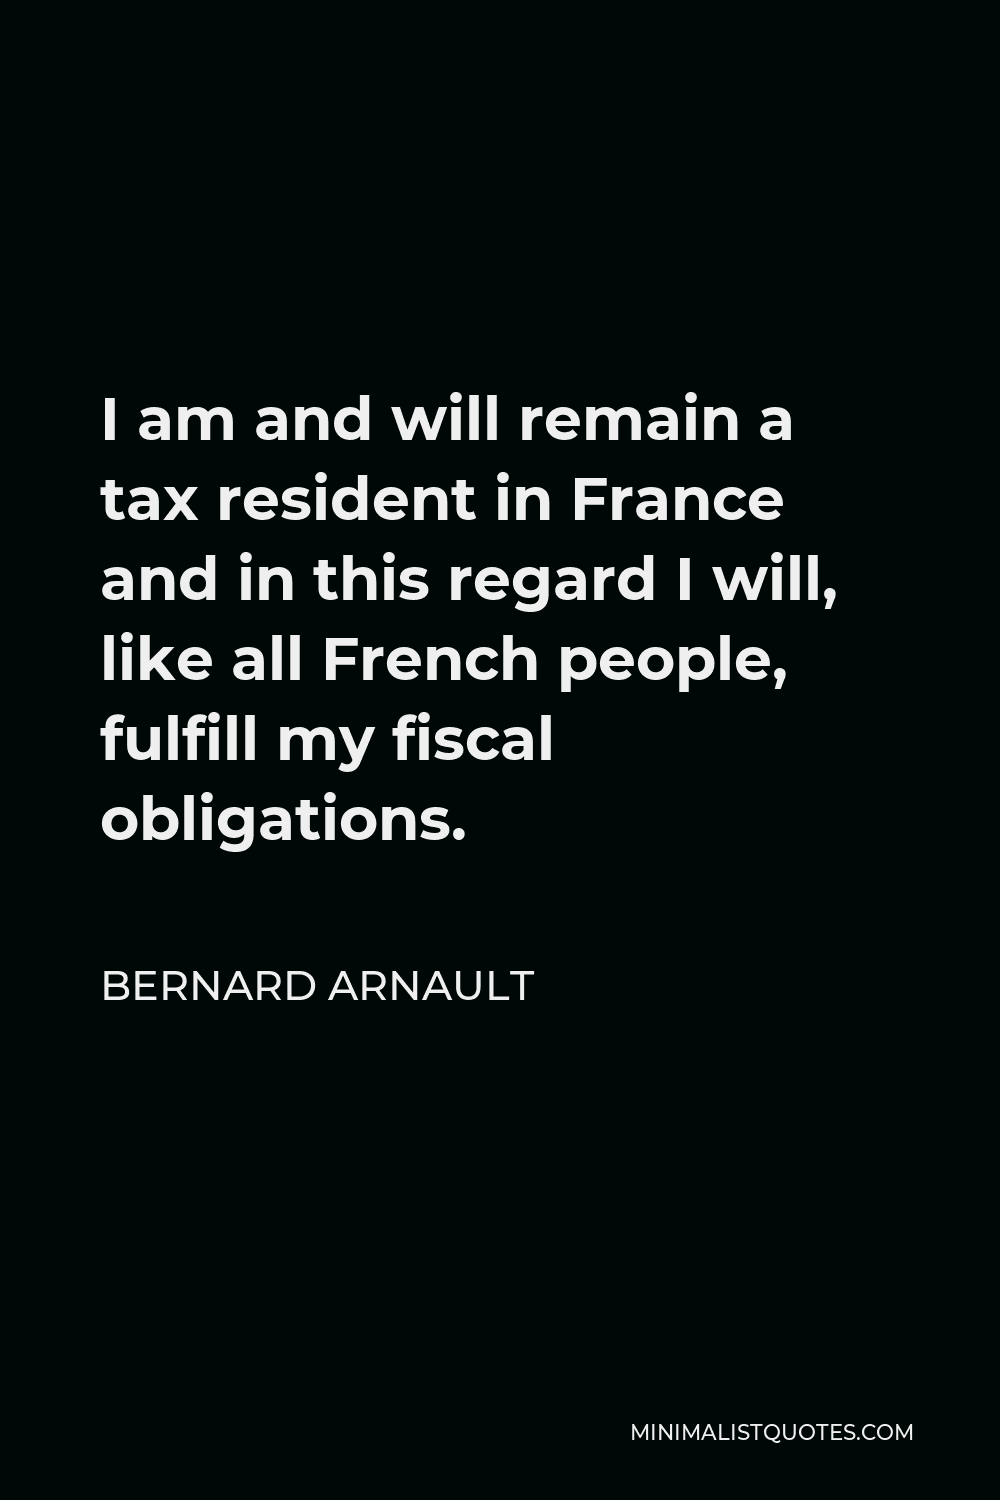 Bernard Arnault Quote - I am and will remain a tax resident in France and in this regard I will, like all French people, fulfill my fiscal obligations.